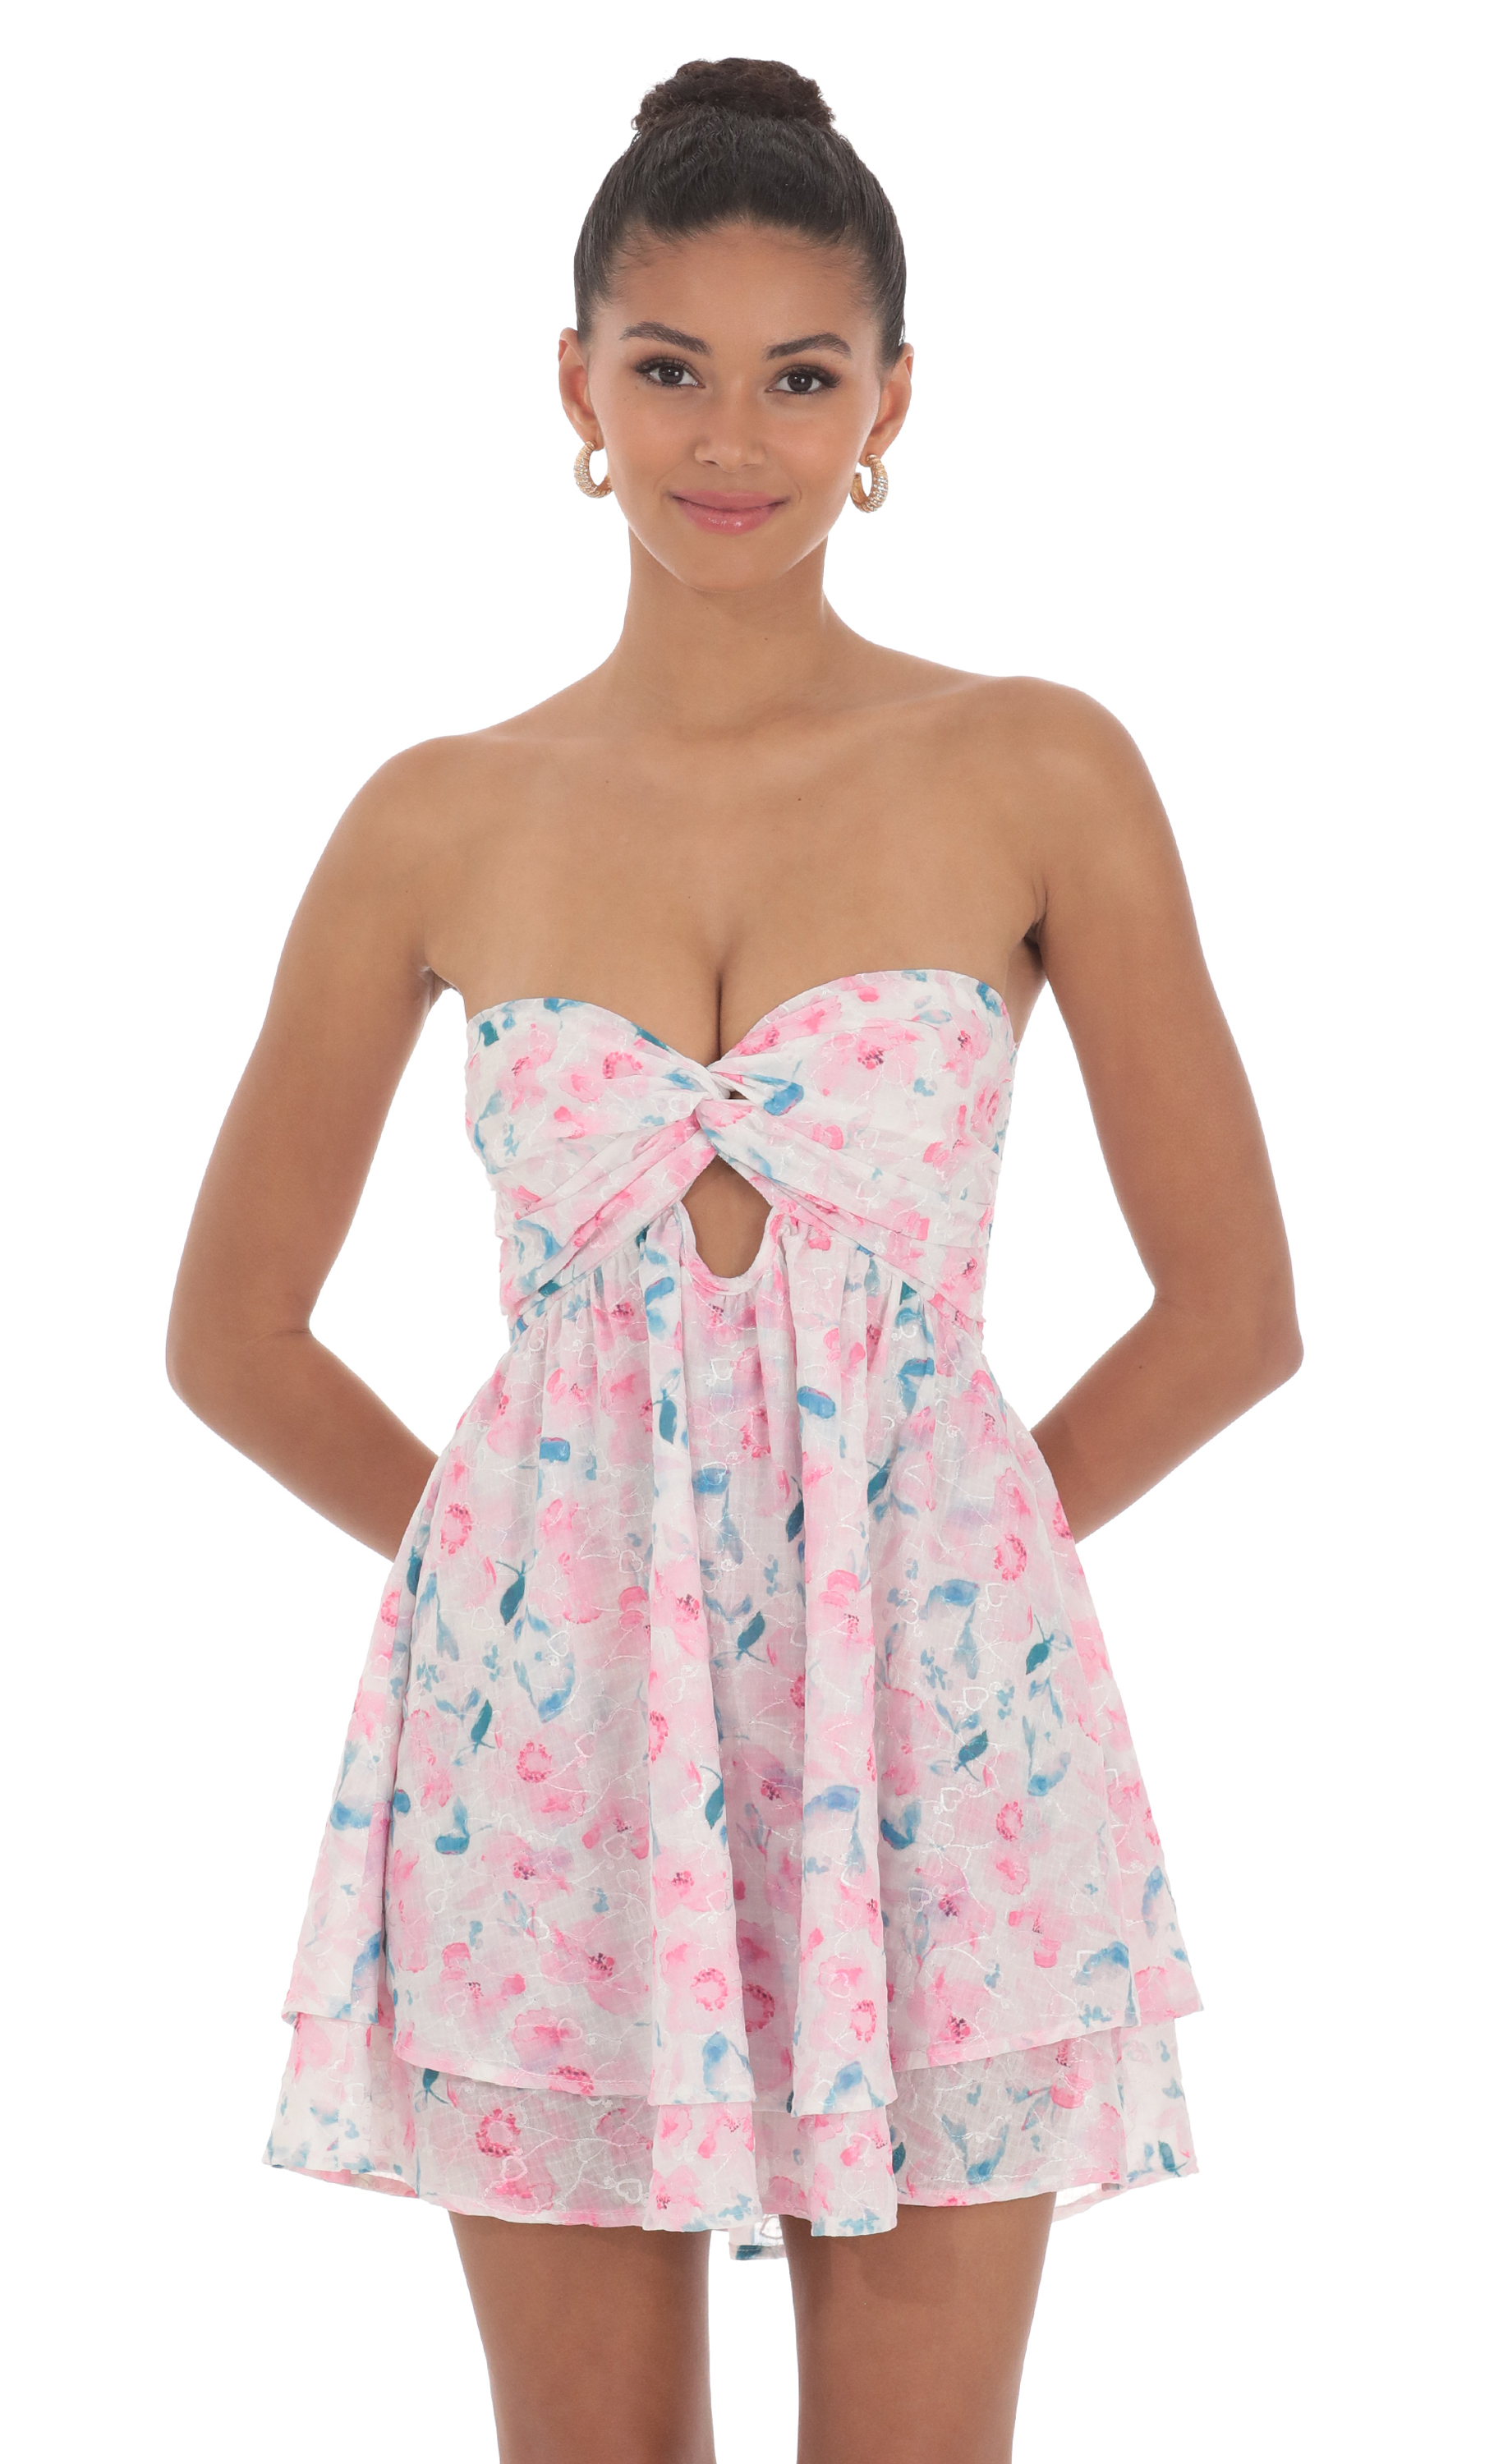 Floral Cutout Babydoll Dress in White